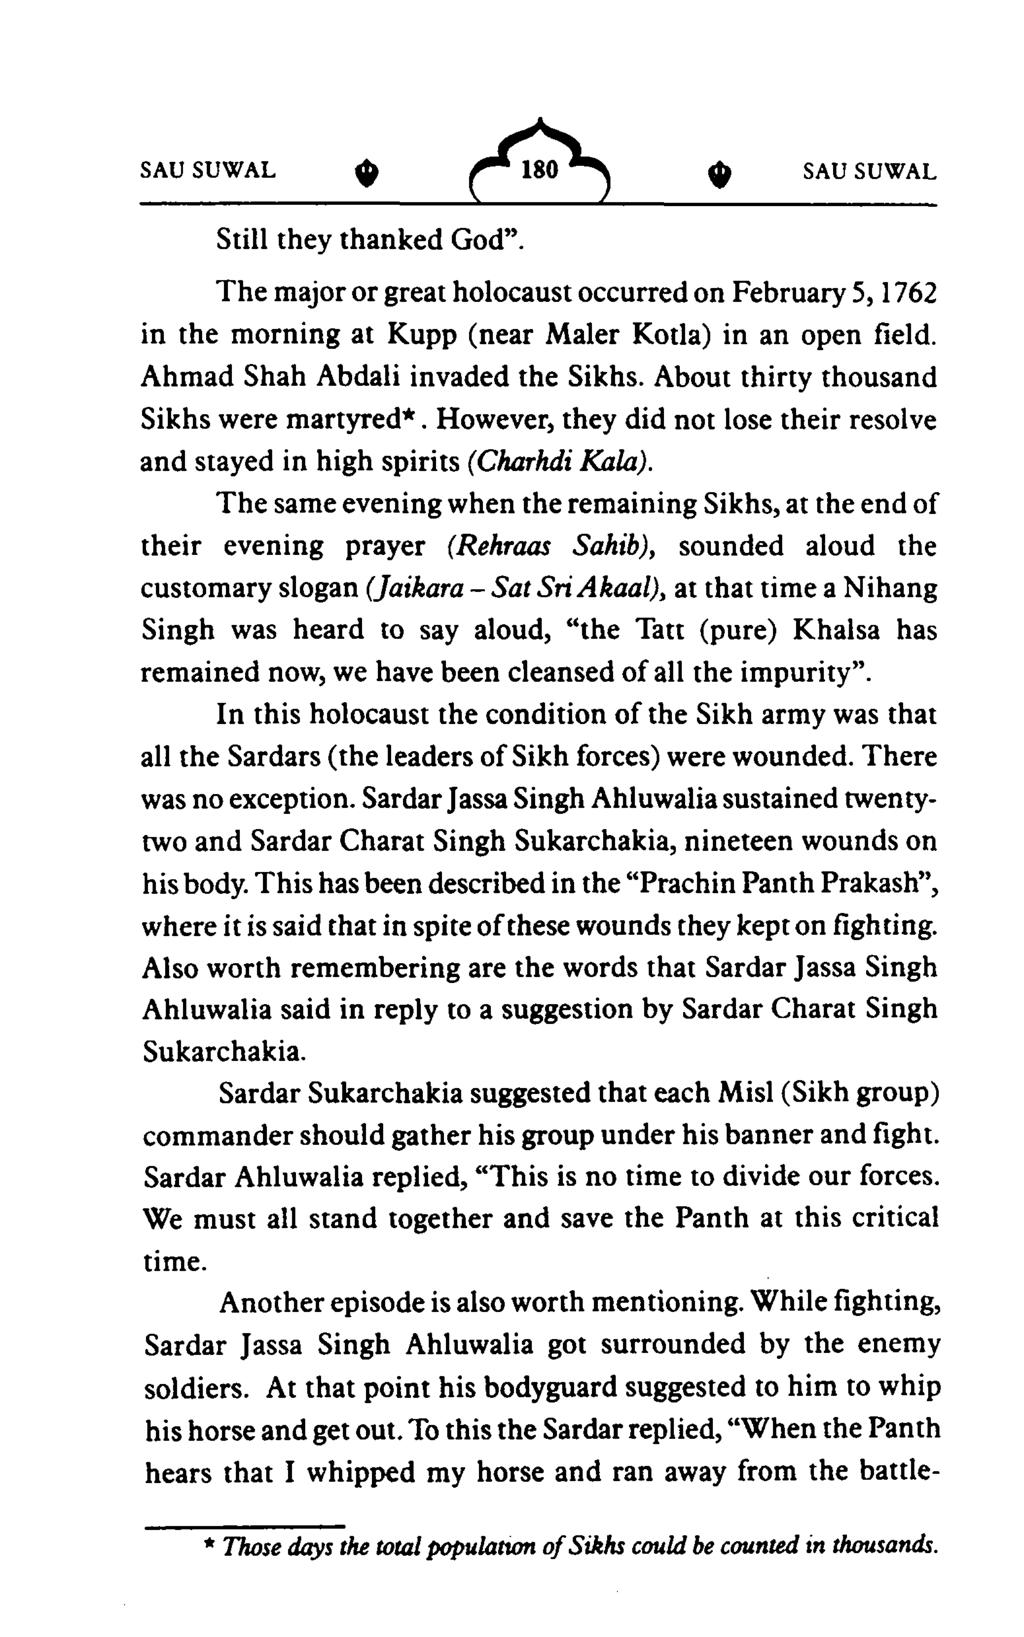 SAU Still they thanked God". SUWAL The major or great holocaust occurred on February 5, 1762 in the morning at Kupp (near Maler Kotla) in an open field. Ahmad Shah Abdali invaded the Sikhs.